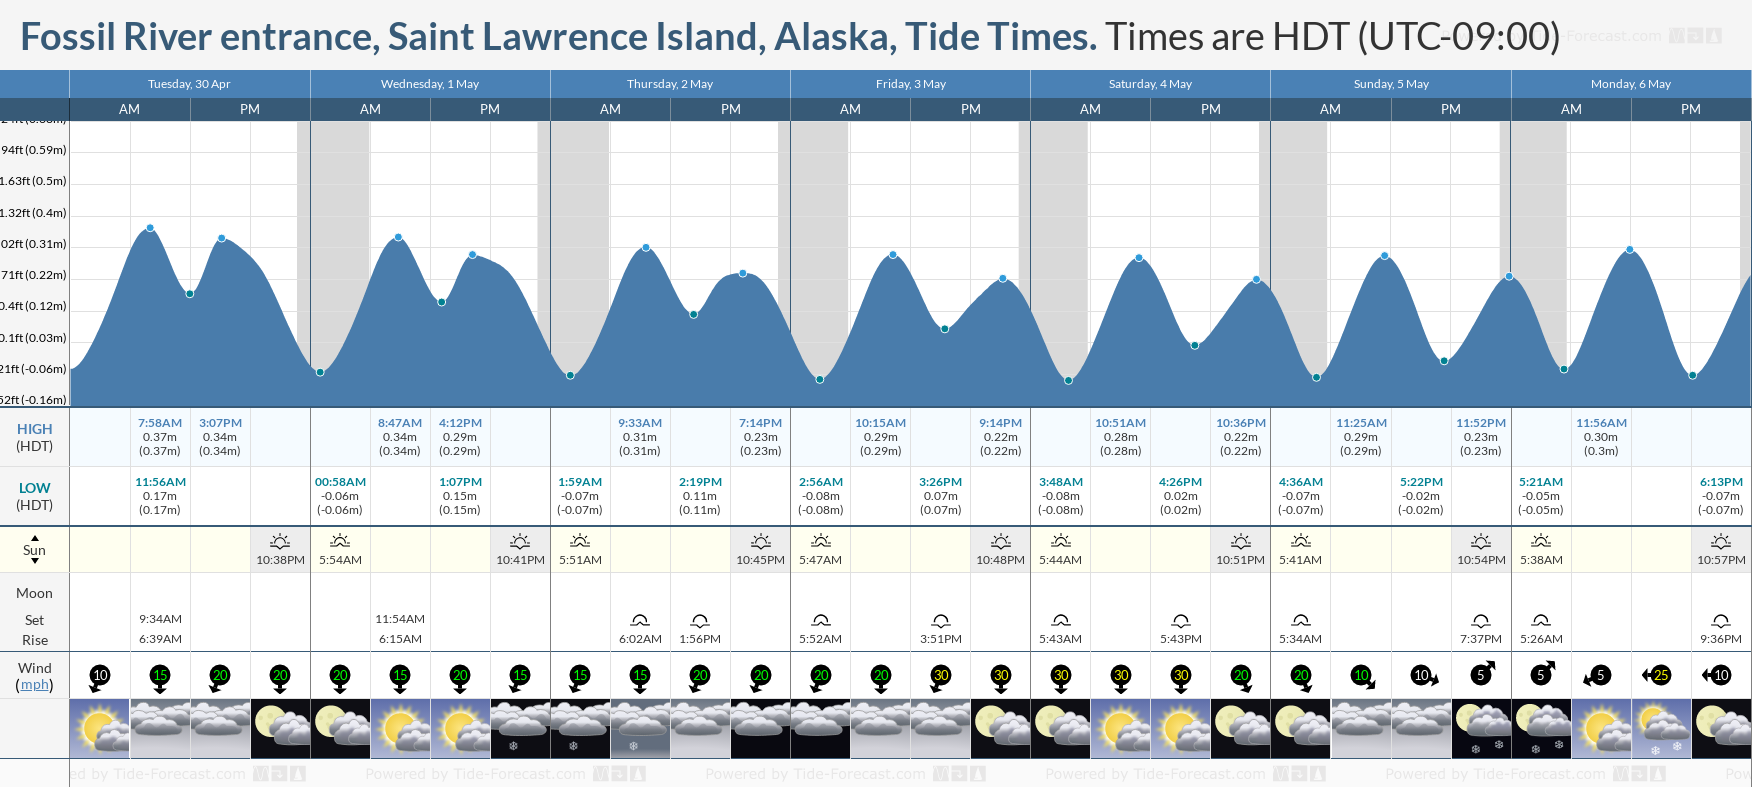 Fossil River entrance, Saint Lawrence Island, Alaska Tide Chart including high and low tide tide times for the next 7 days